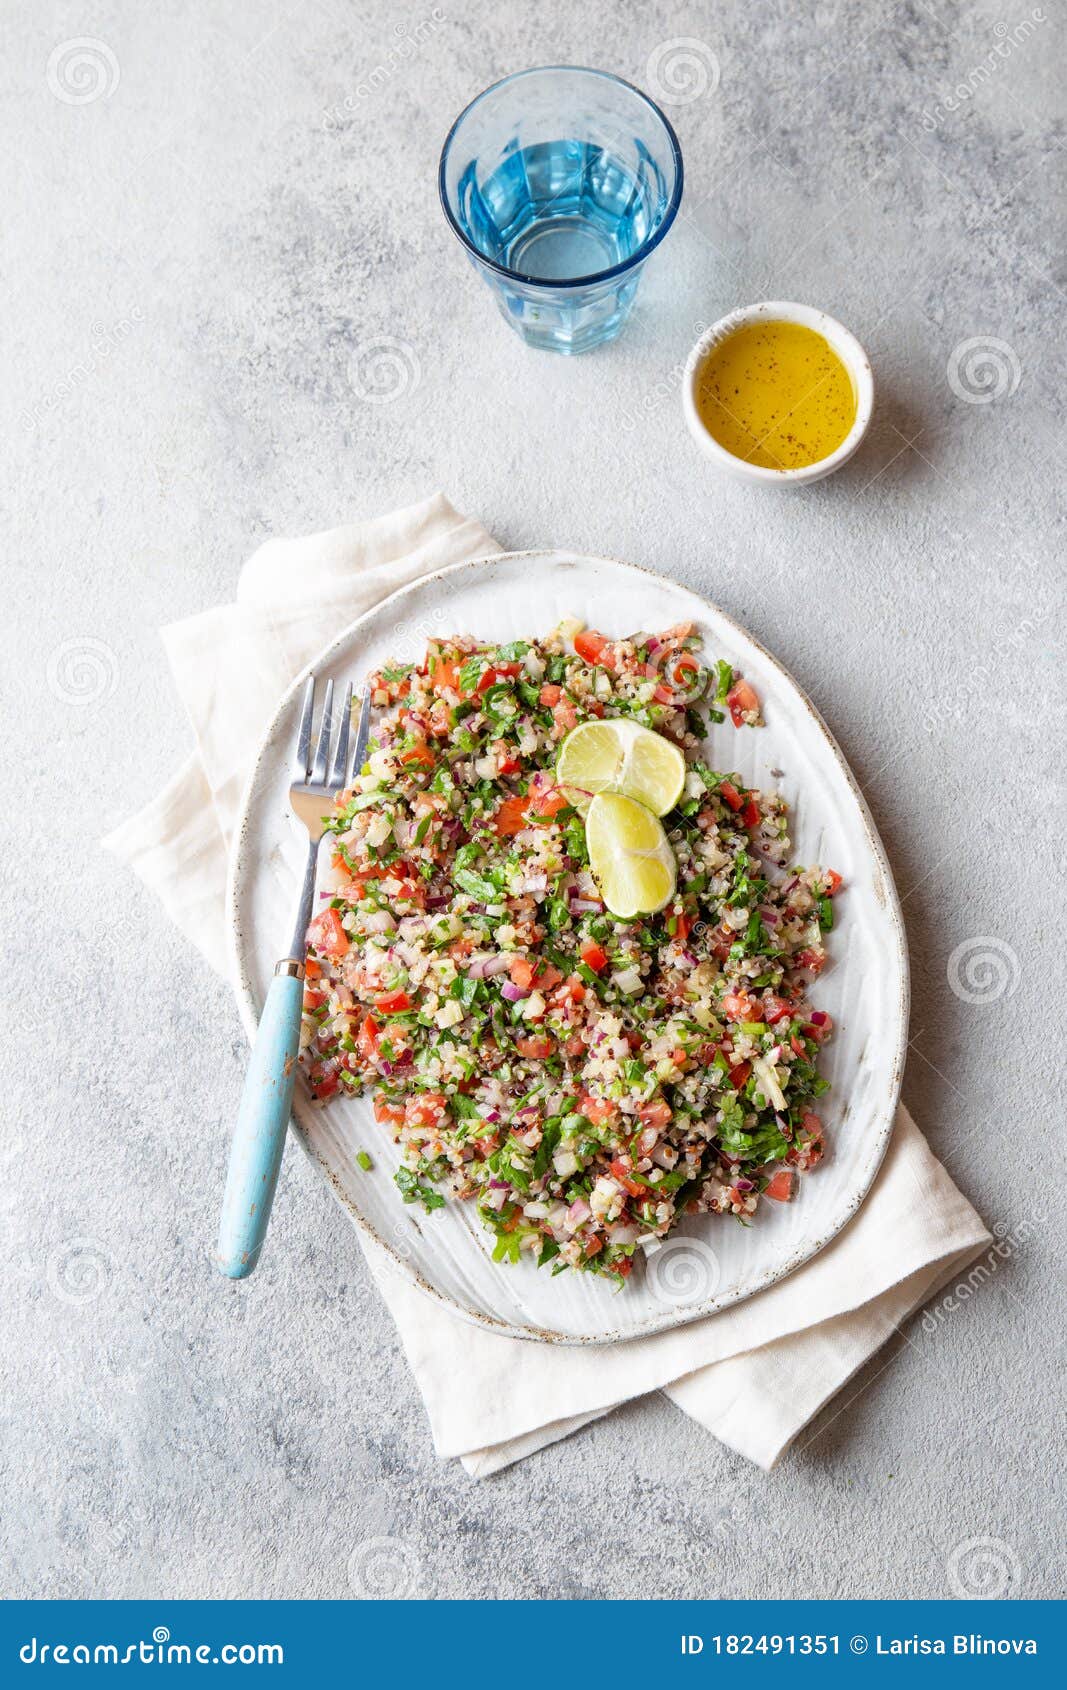 quinoa quinua salad with tomatoes and herbs in white bowl